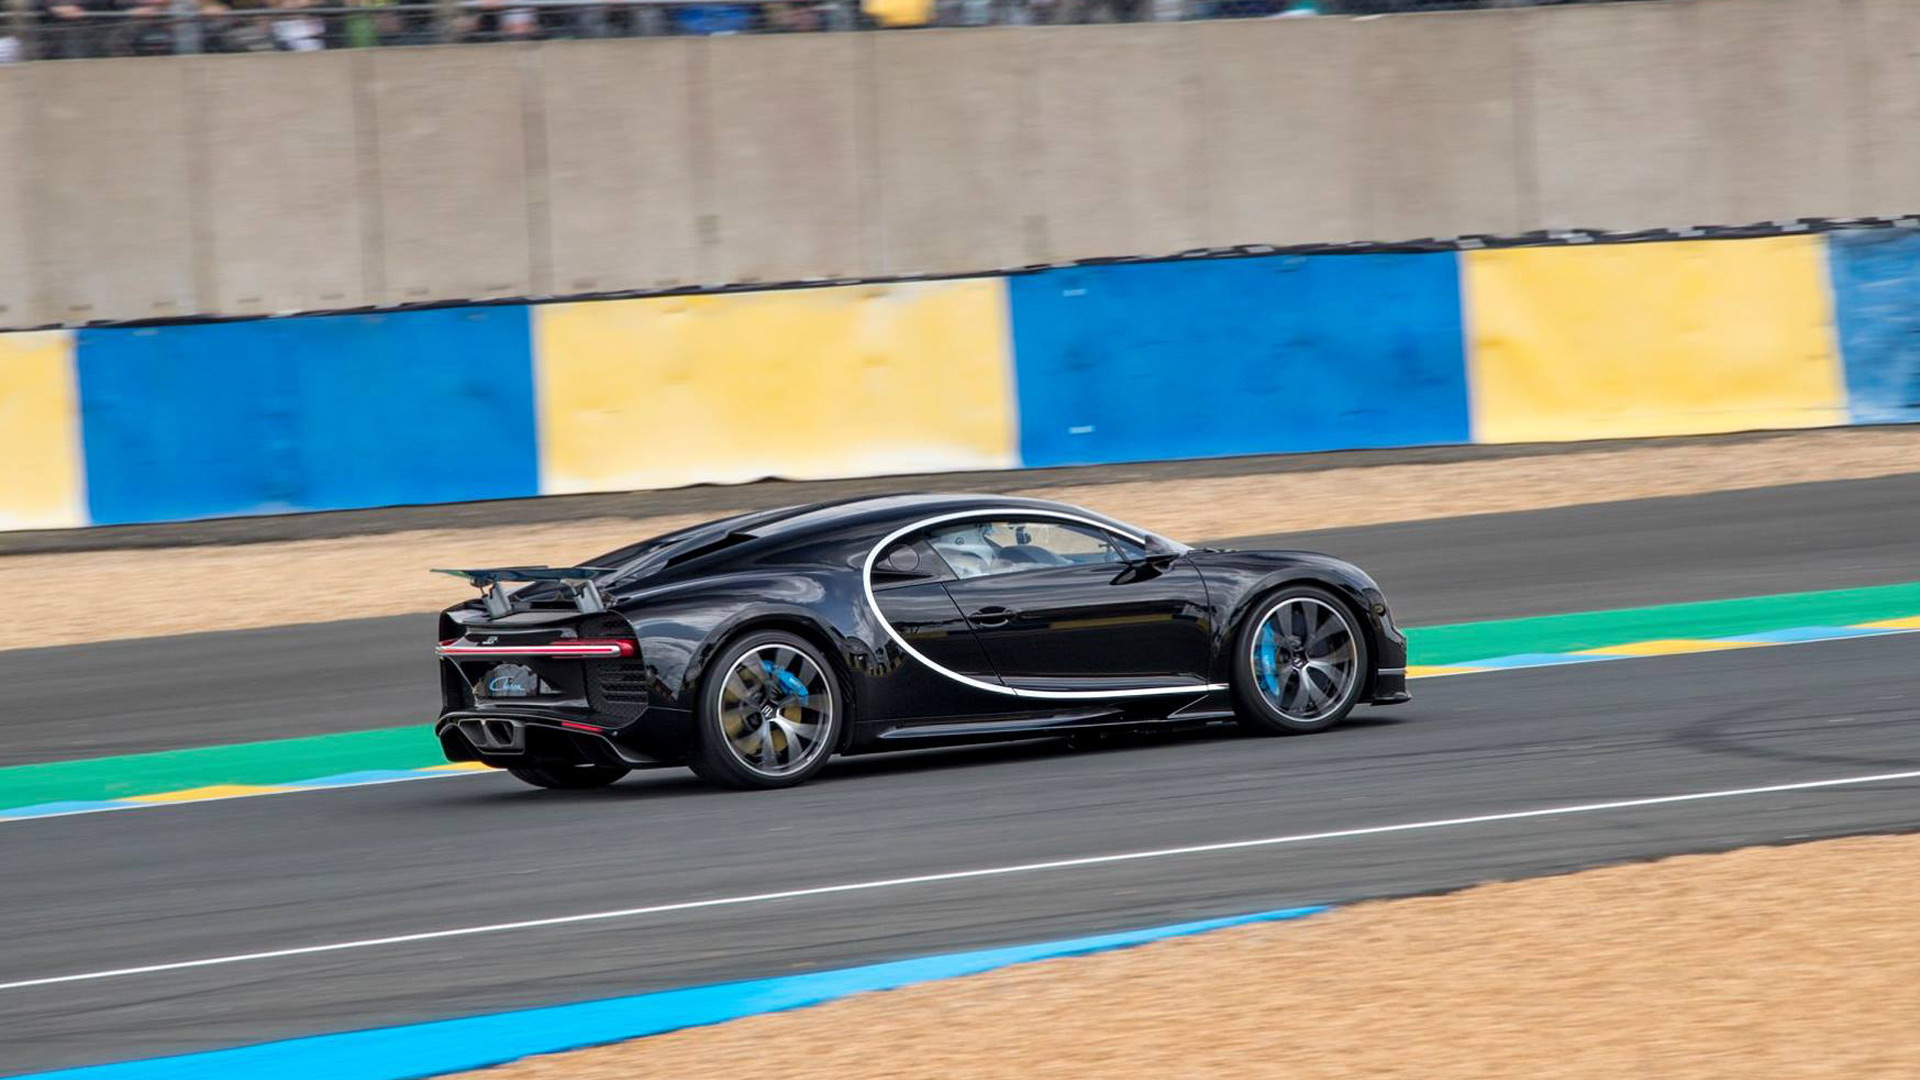 Bugatti Chiron at the 2016 24 Hours of Le Mans